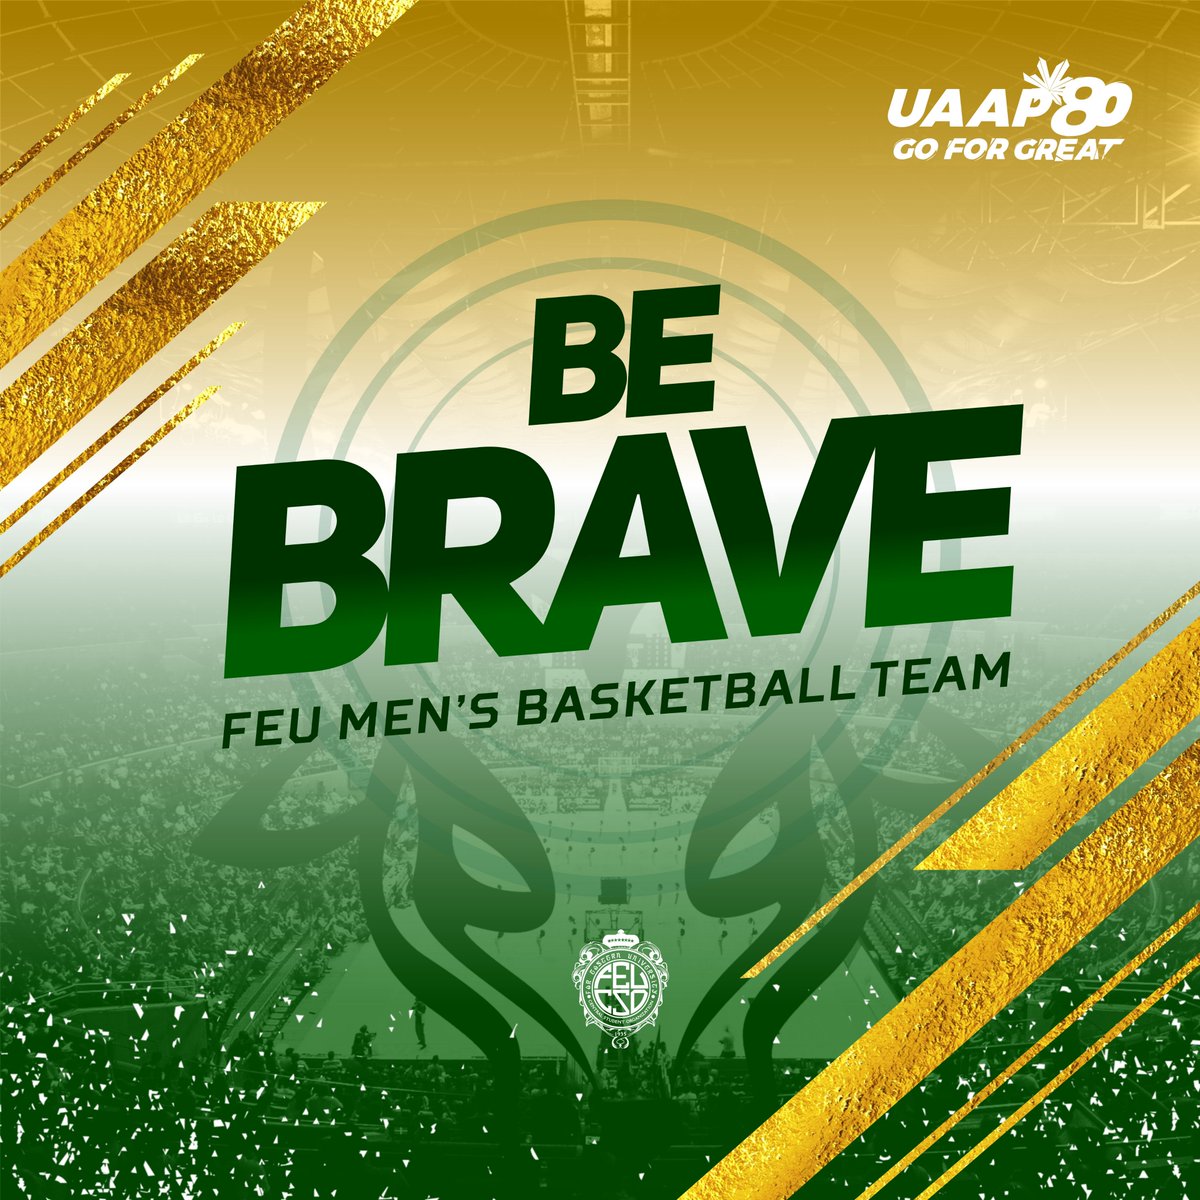 FEU Men's Basketball Team, we of the FEU Community look forward to a momentous show of bravery in your battle against the Blue Eagles of Ateneo.

Win or lose, we will not falter in our respect and gratitude towards what you all have accomplished.

#FierceTamaraws